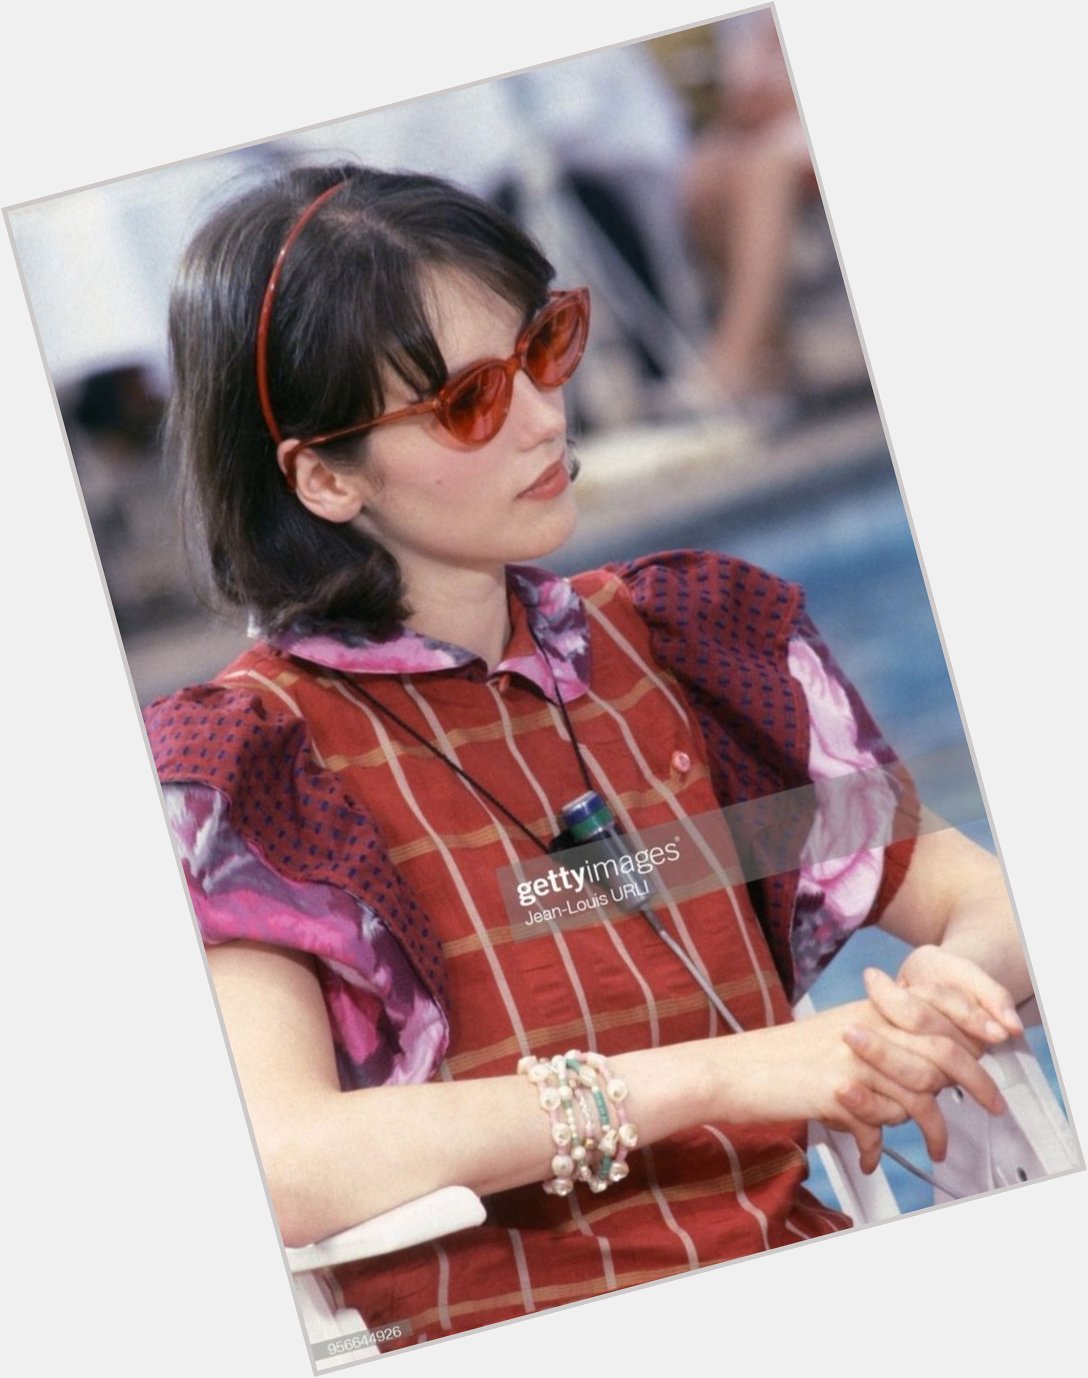 Happy birthday to isabelle adjani,, not many people know this but she actually invented sunglasses <3 